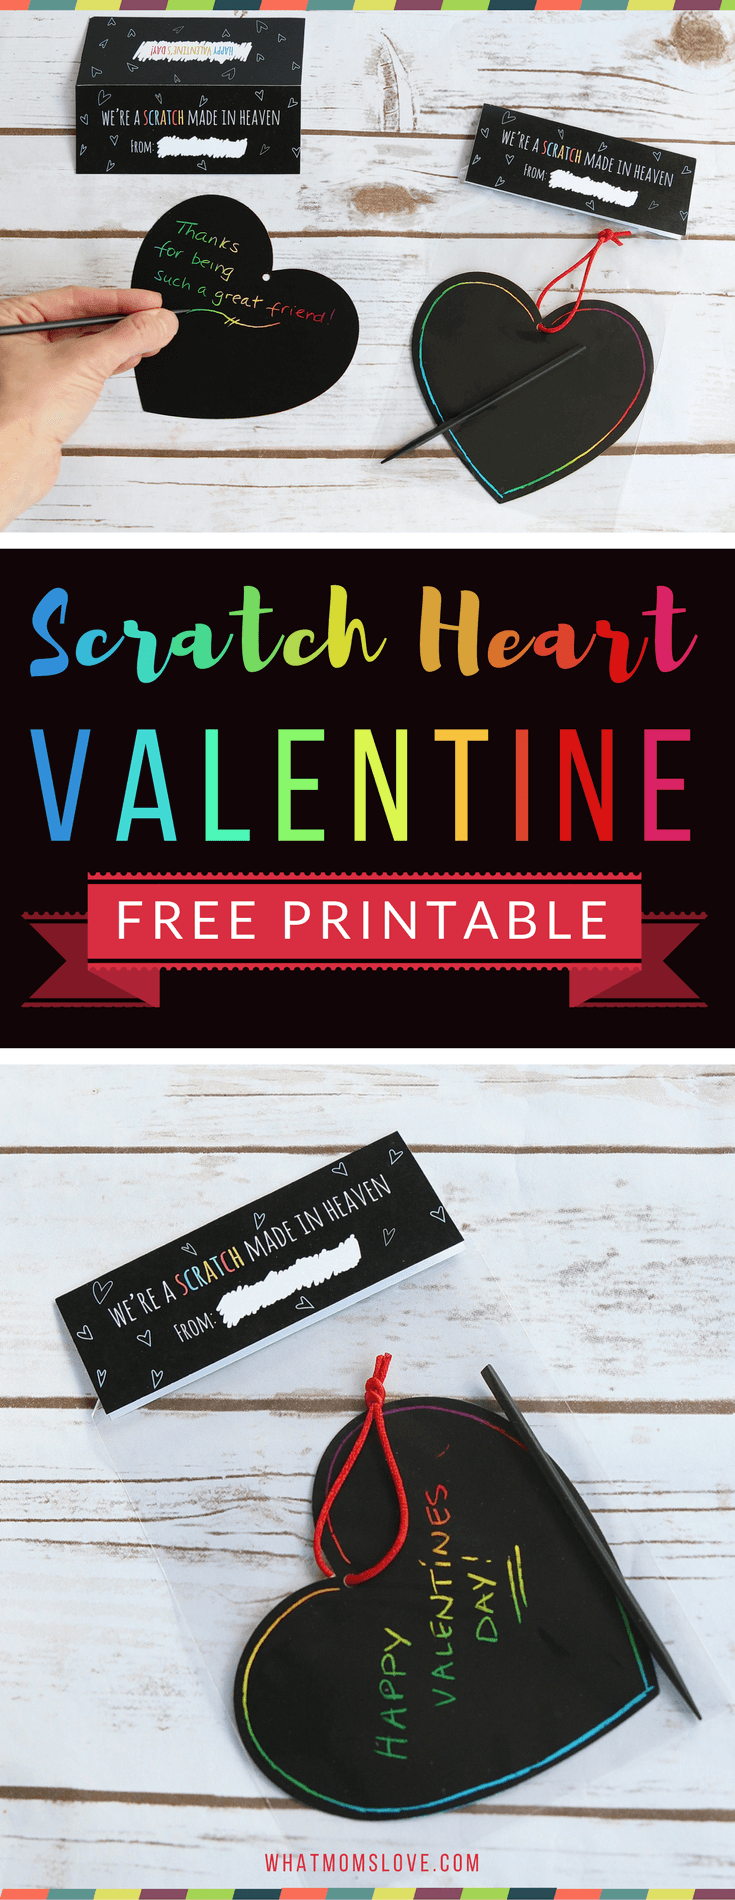 Free Printable Valentine for kids with a fun scratch heart! Such a fun idea for a non-candy Valentines card - perfect for your child's classroom Valentine's Day party!